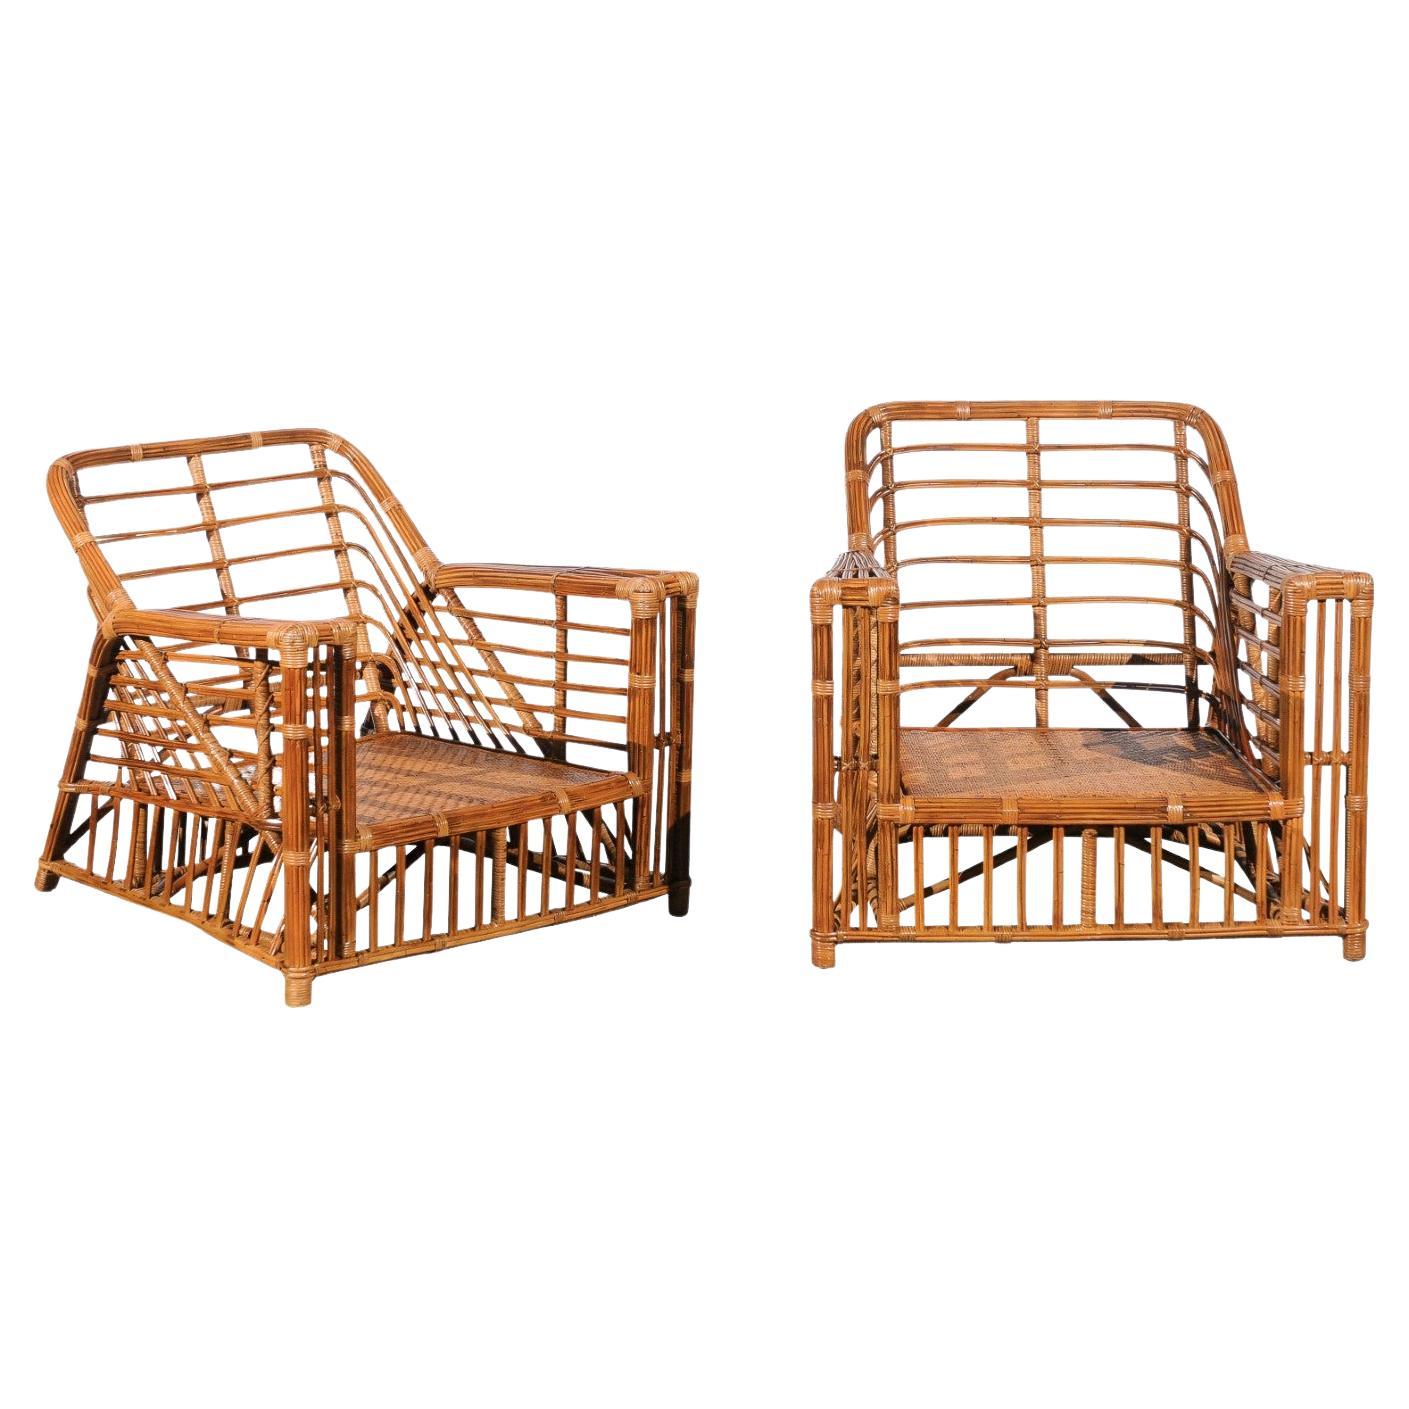 Exquisite Restored Pair of Modern President's Loungers by McGuire, circa 1985 For Sale